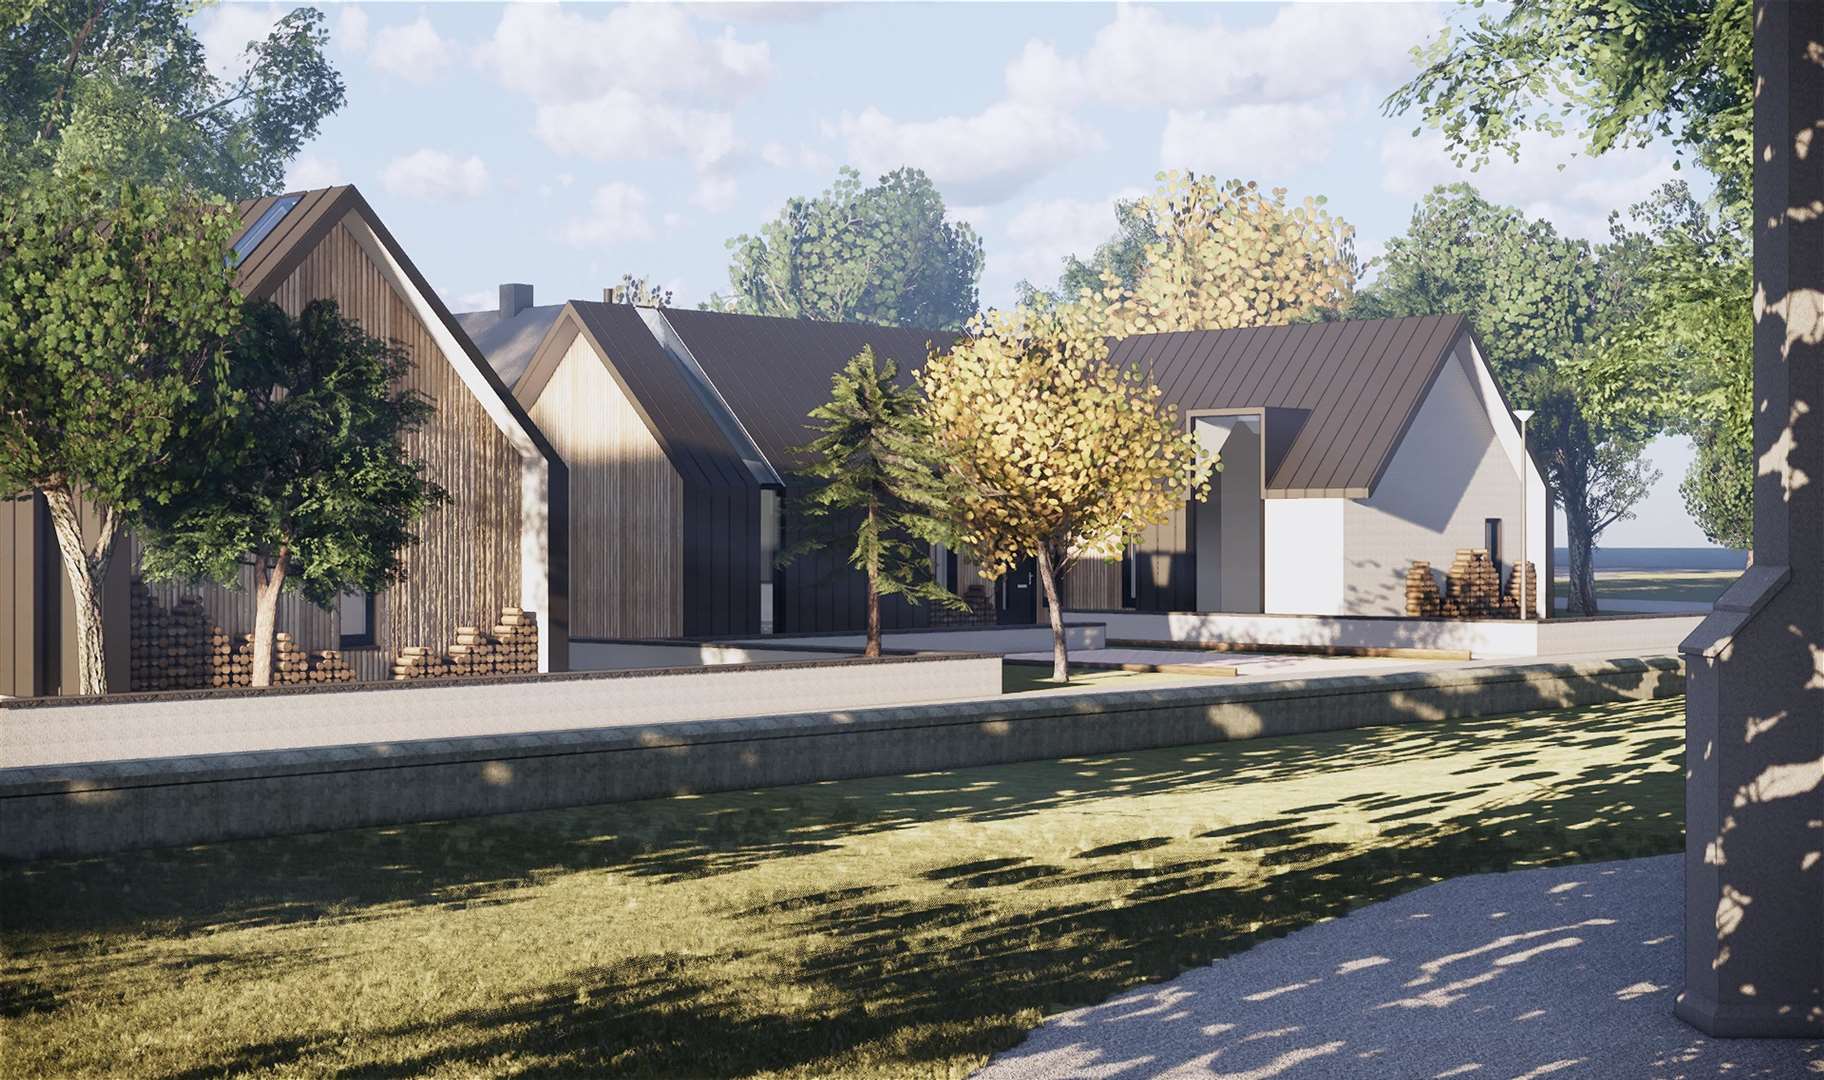 An impression of two of the proposed new homes in the small development rejected by the committee (Photo: Moxon Architects)